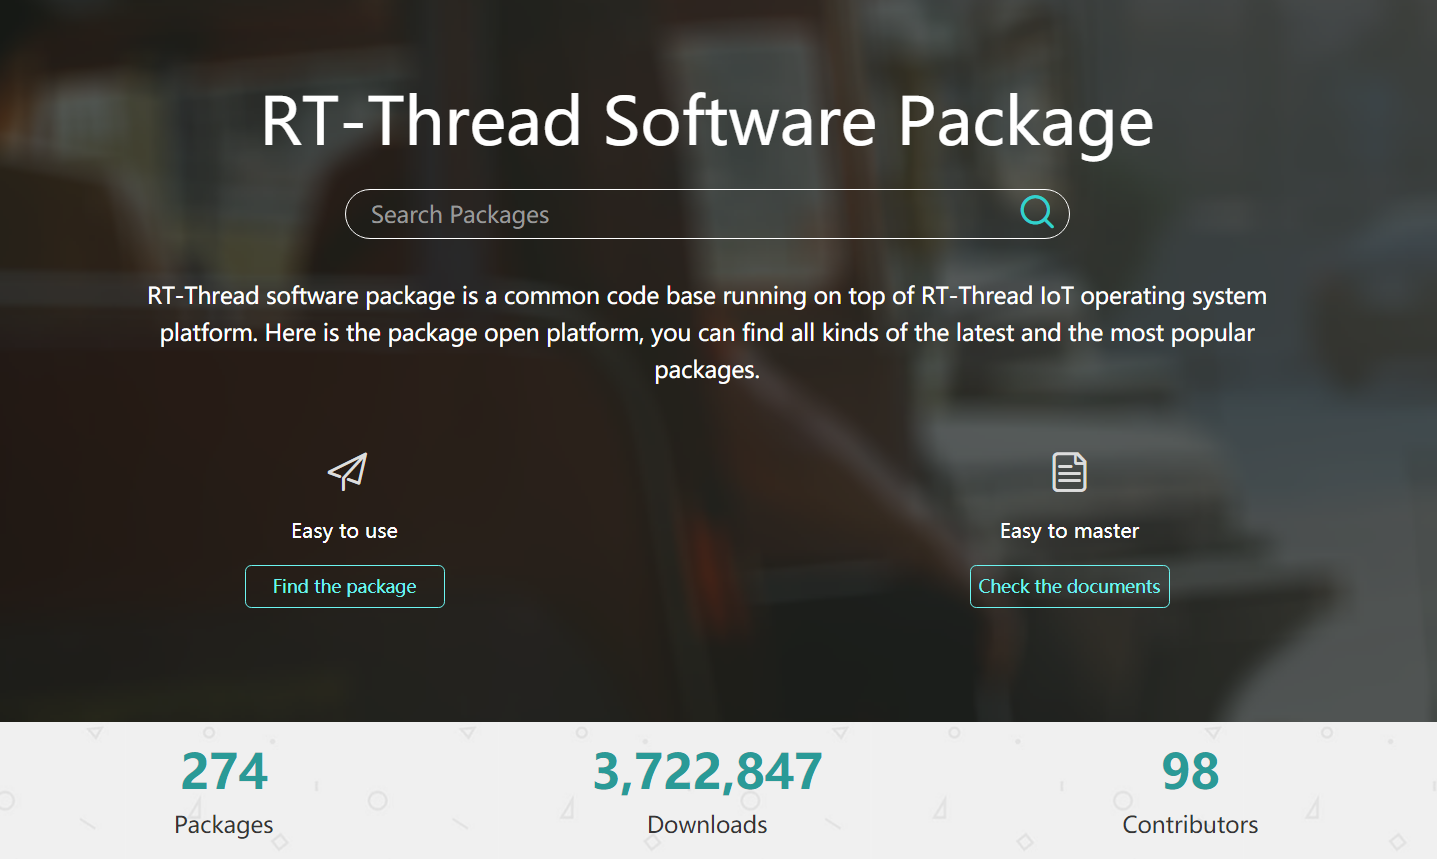 RT-Thread Software Package screen.